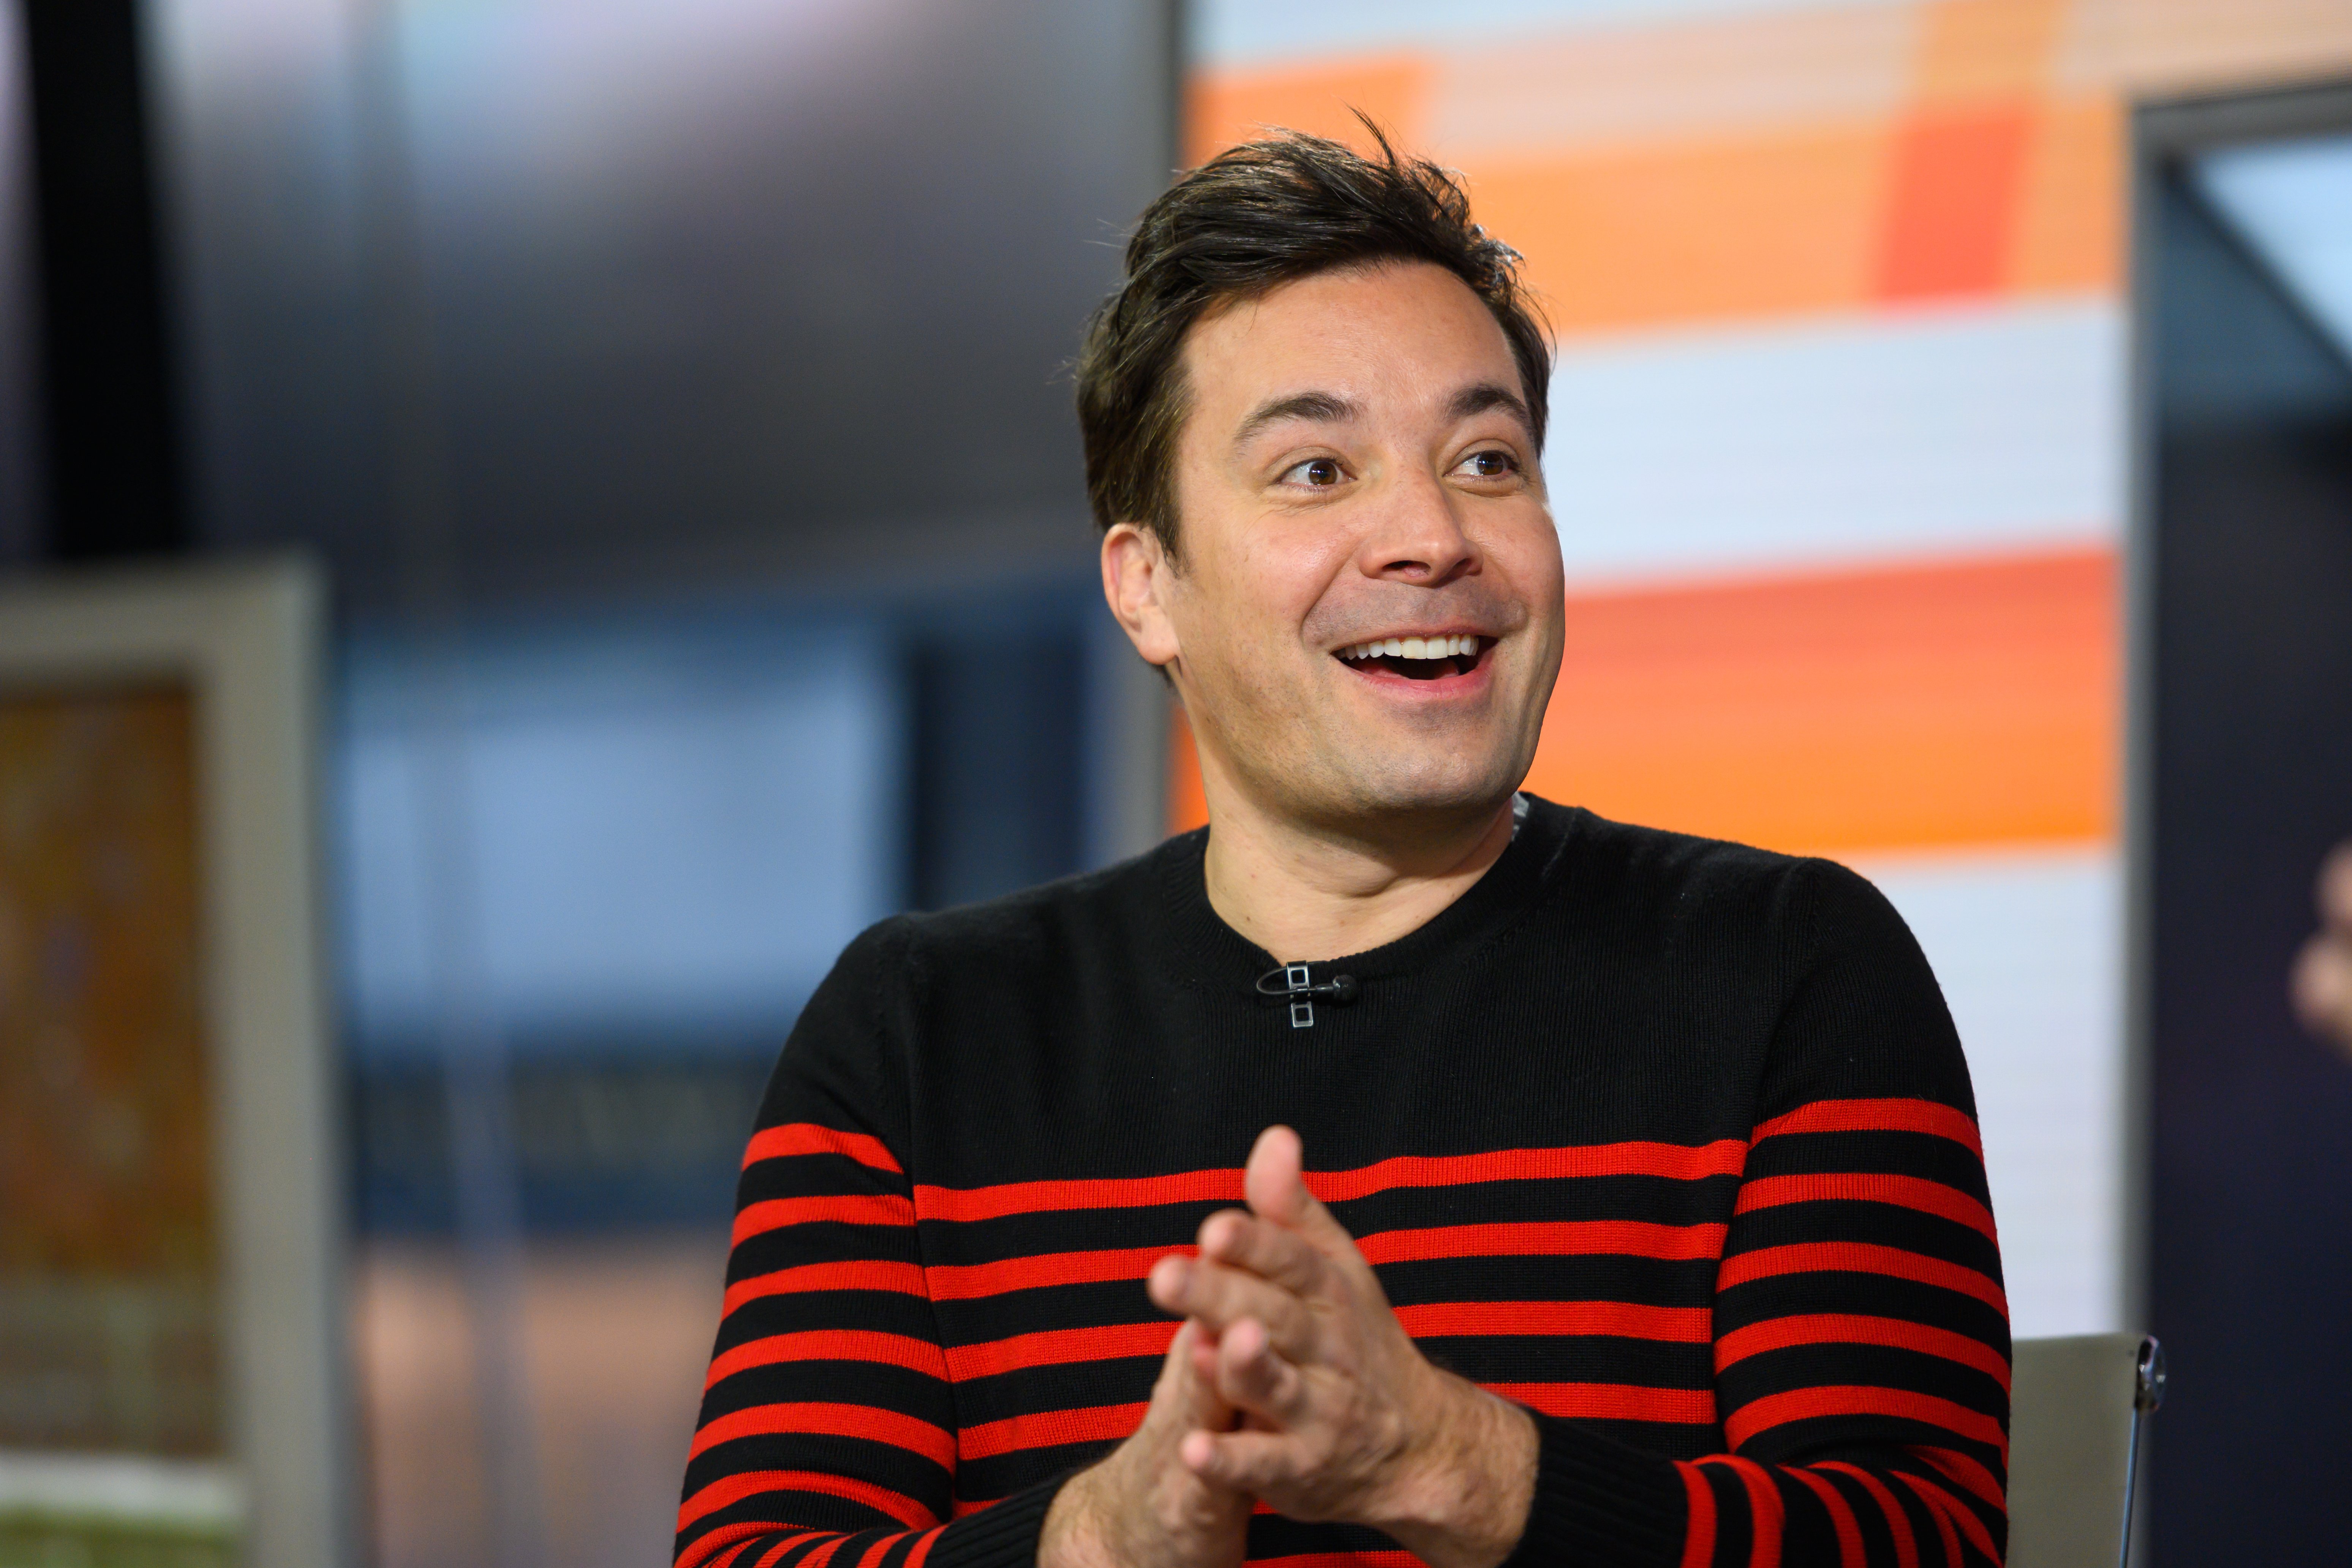 Jimmy Fallon on Today January 28, 2020 | Photo: Getty Images